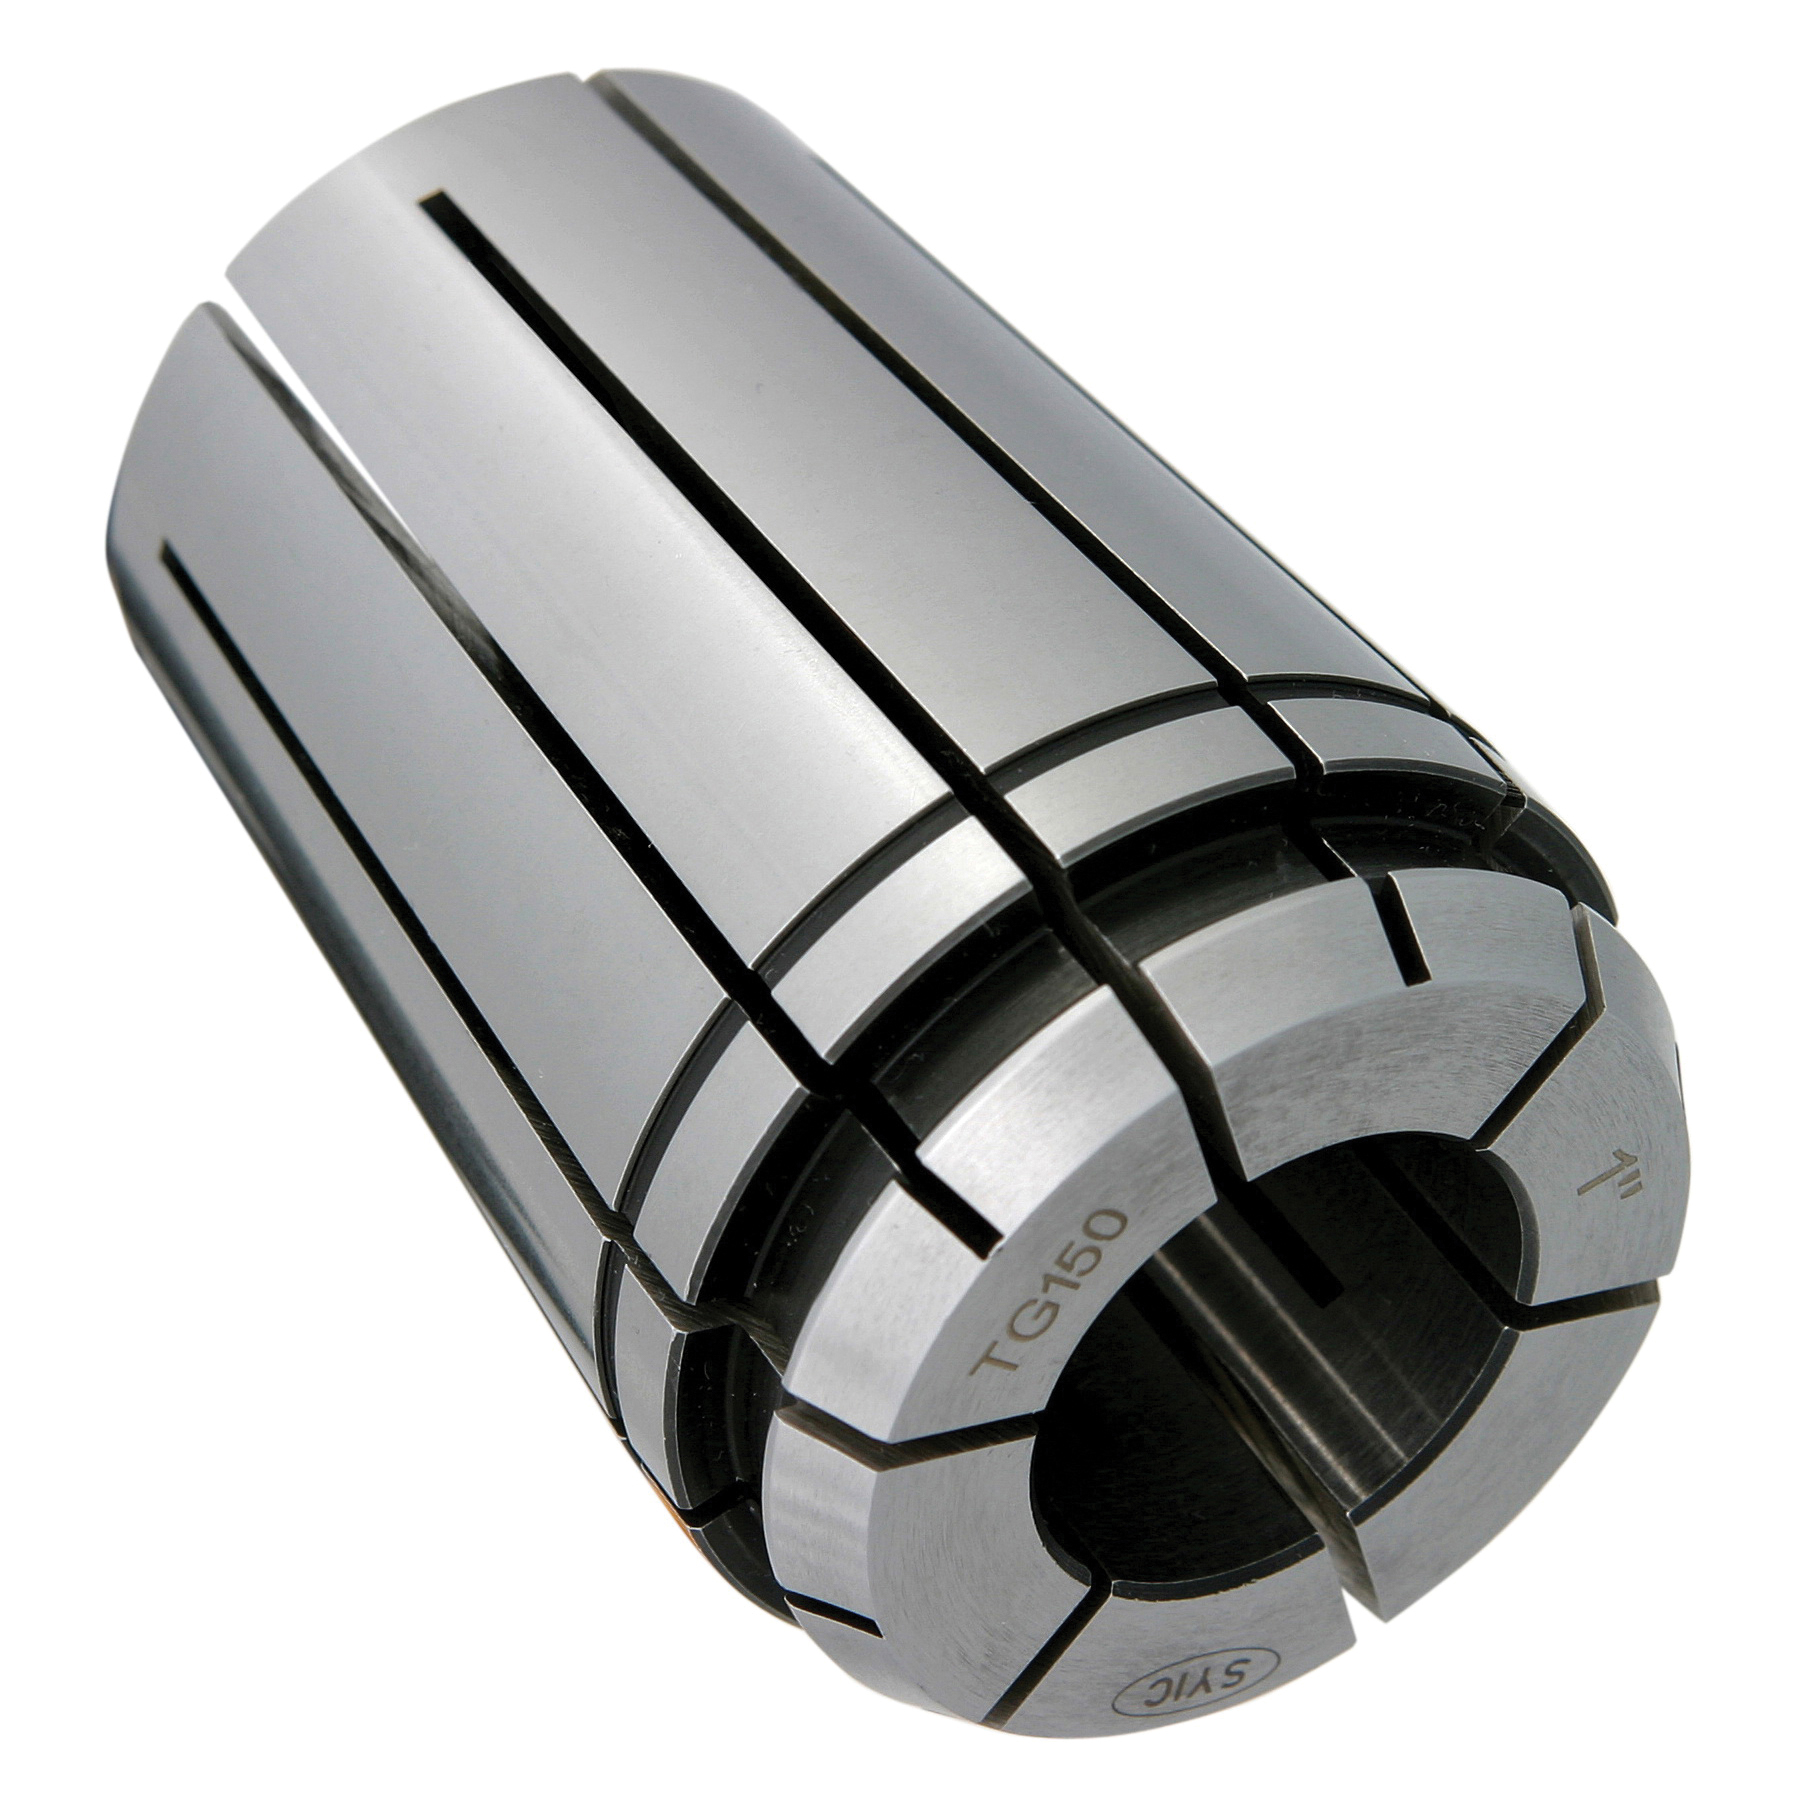 TG150 1-11/64" COLLET